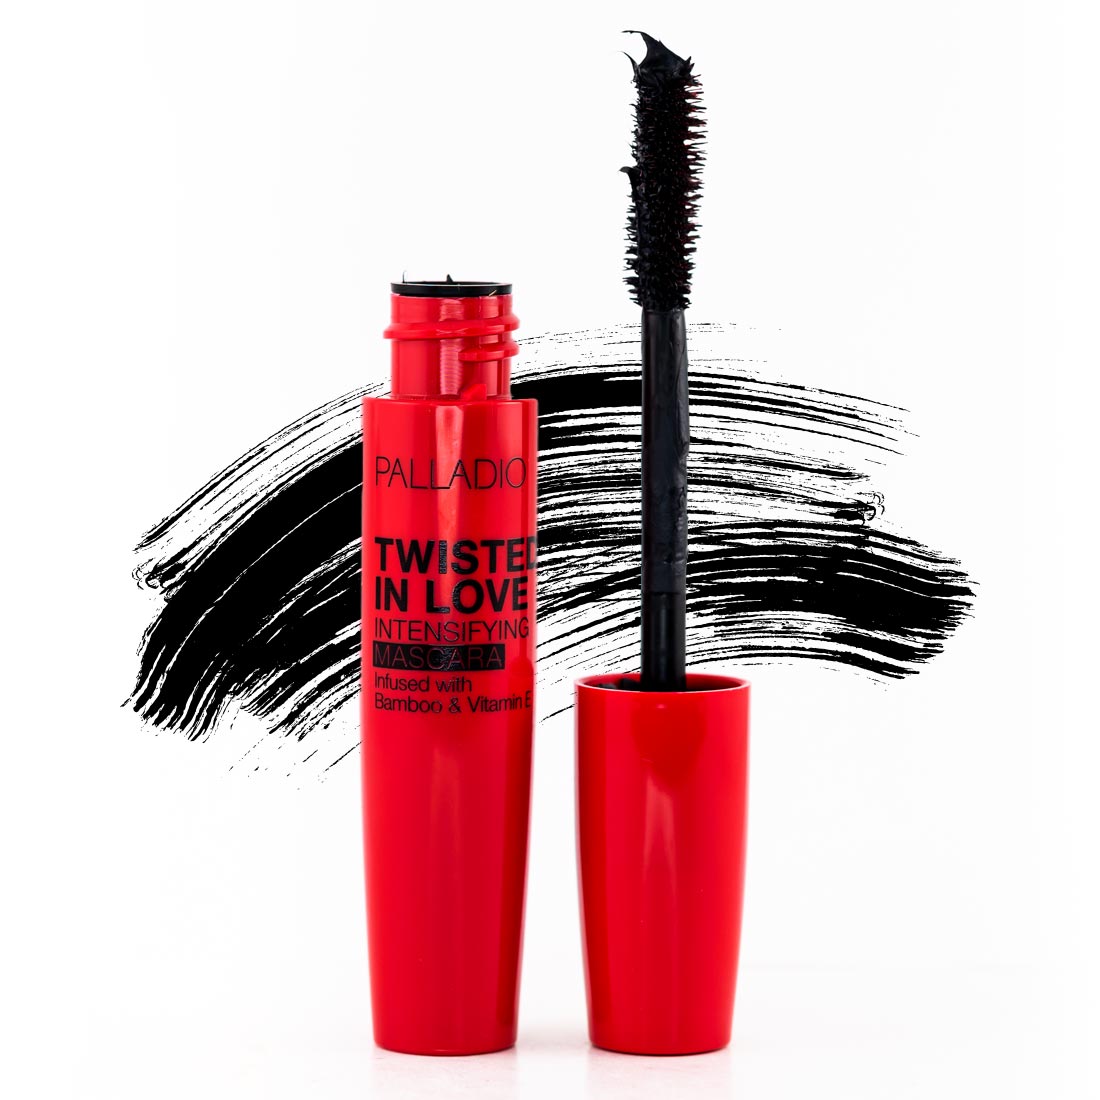 TWISTED IN LOVE MASCARA